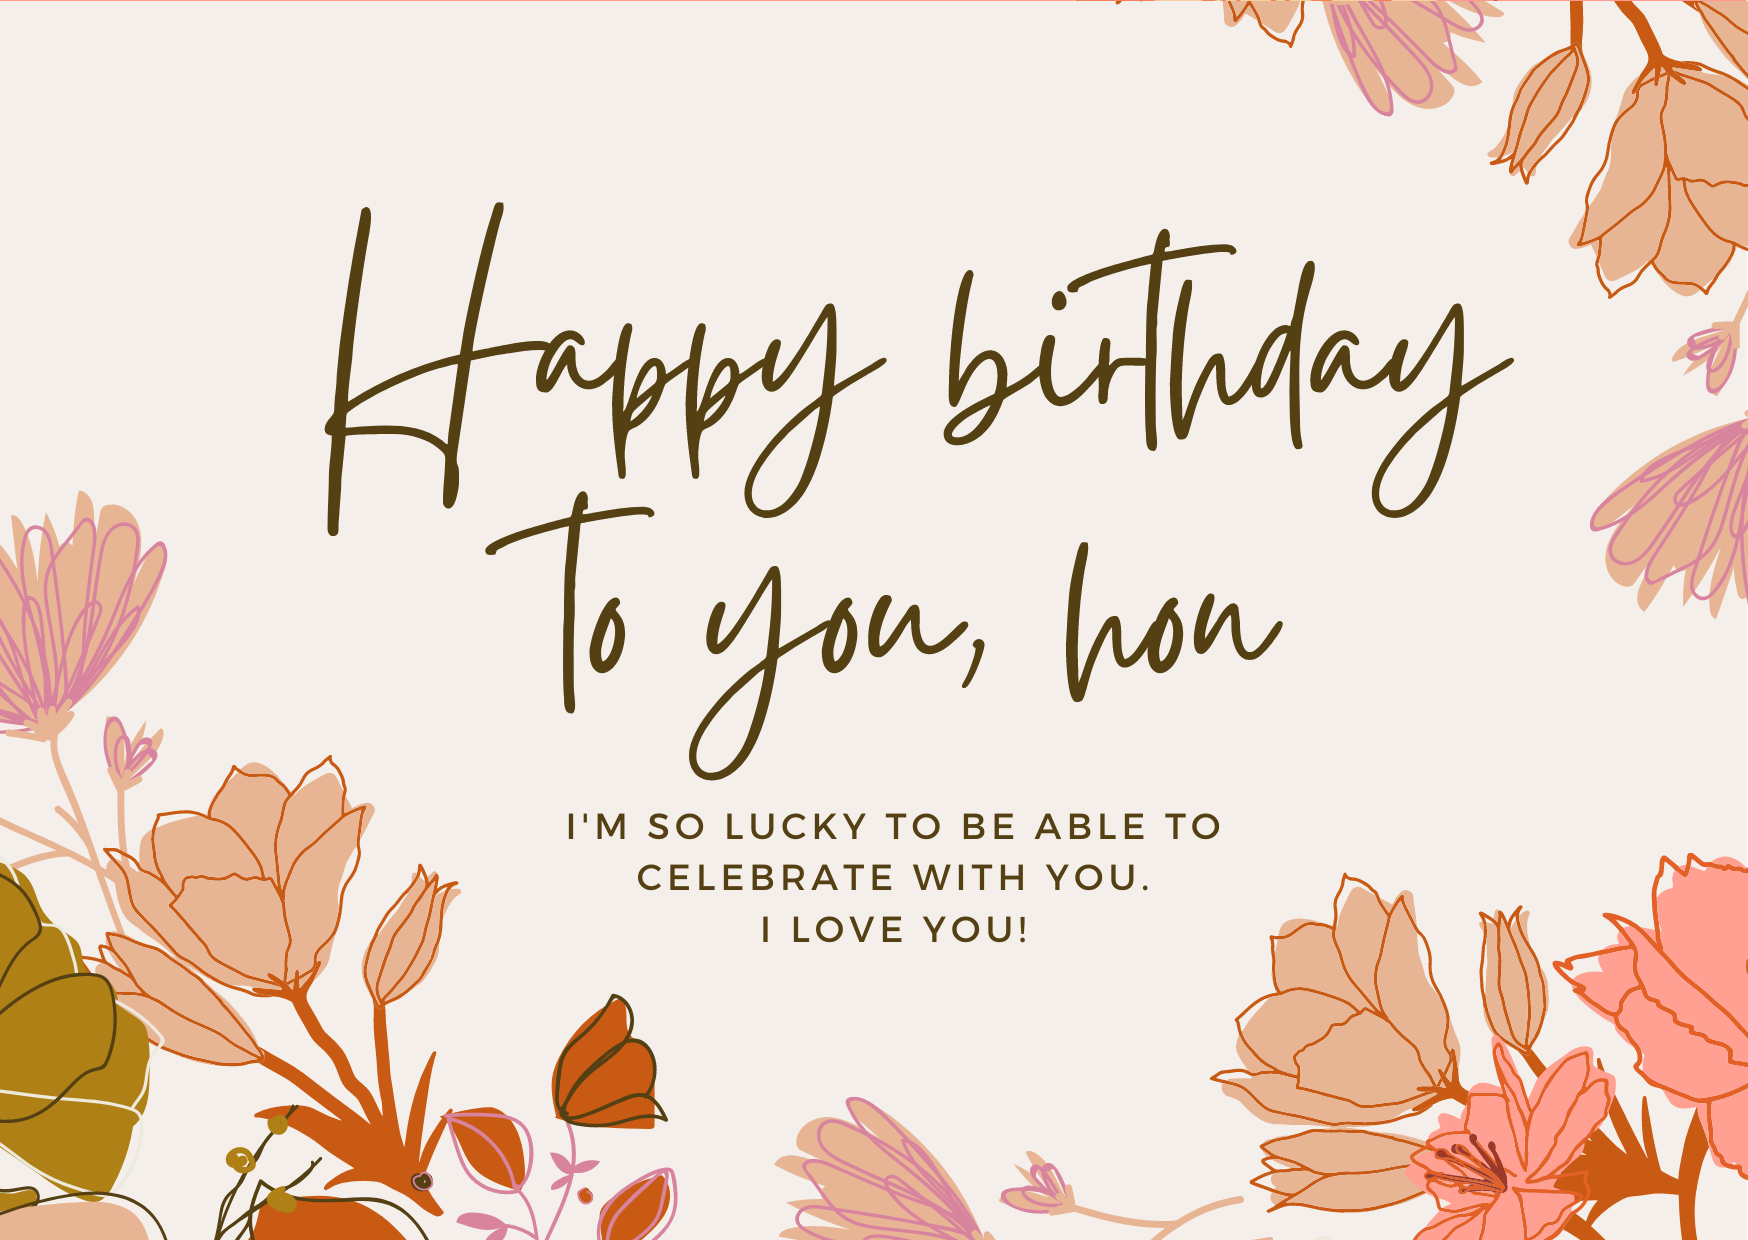 What to write on fiance's birthday card?